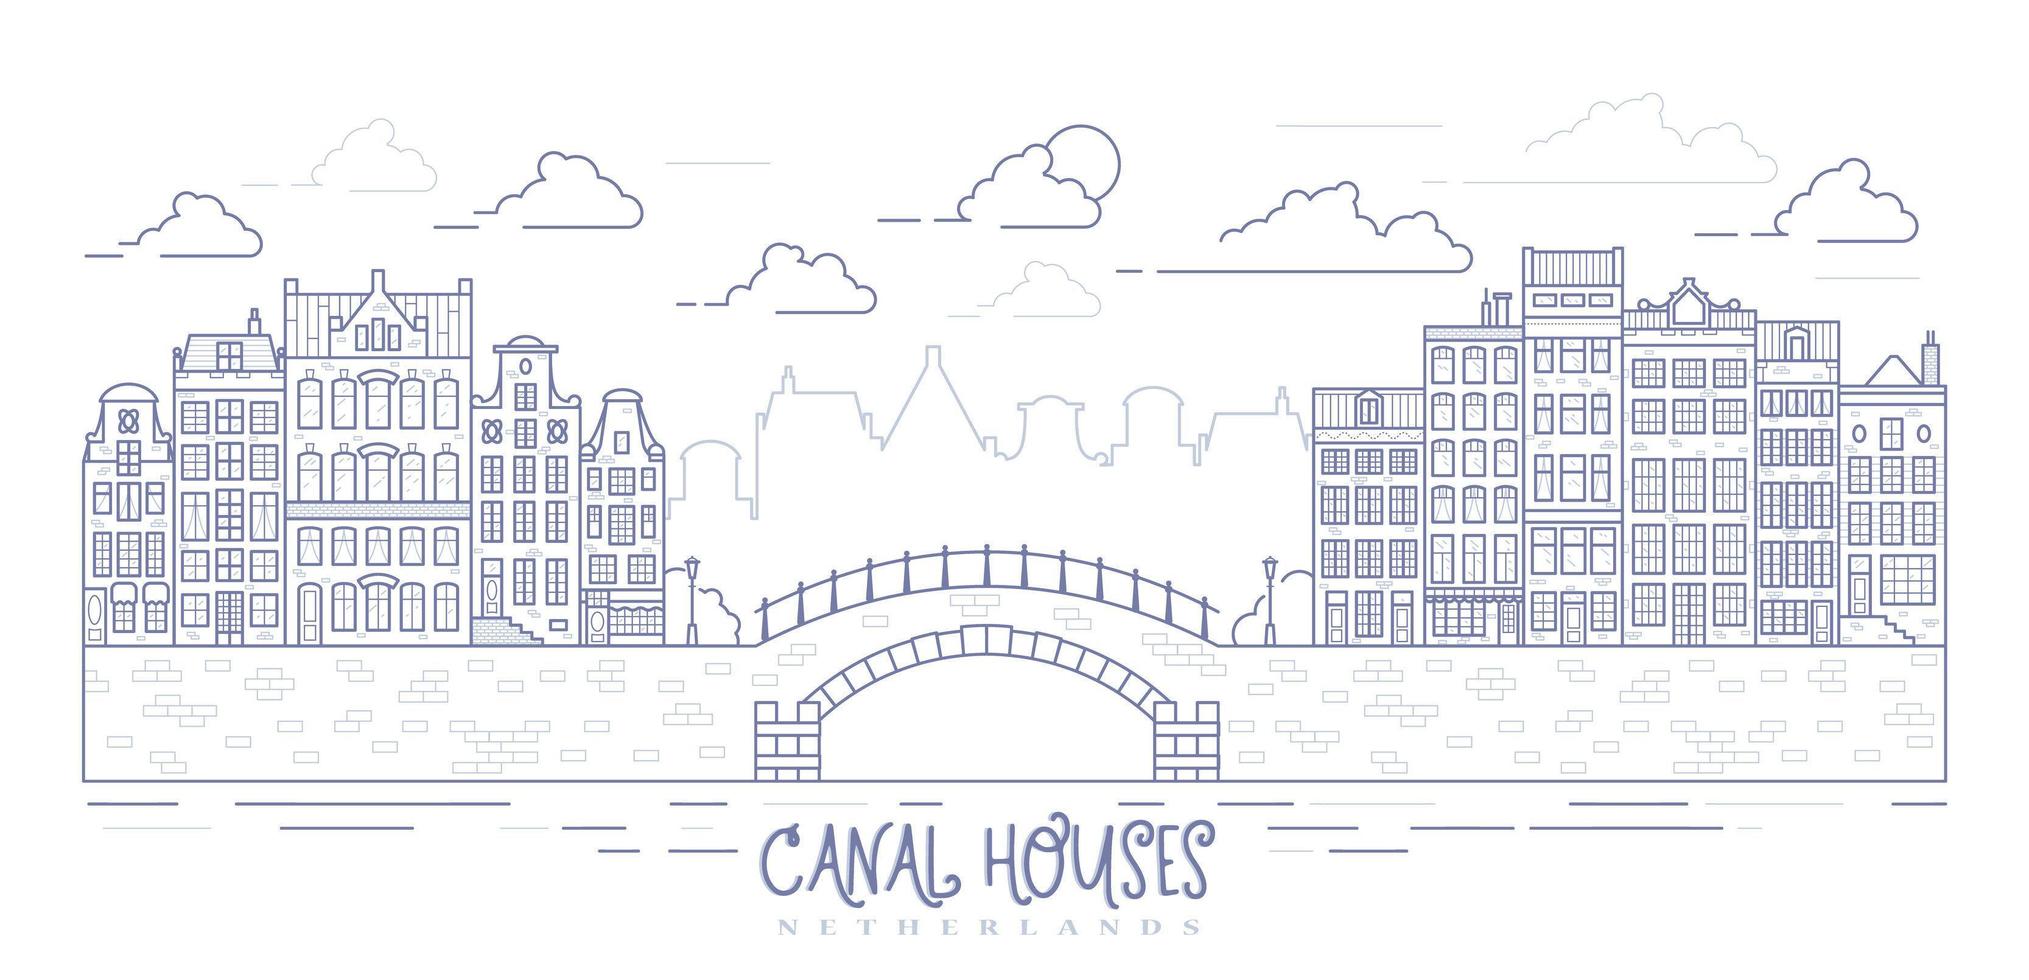 Amsterdam old style houses. Typical dutch canal homes lined up near a canal in the Netherlands. Building and facades on bridge. Vector outline illustration.